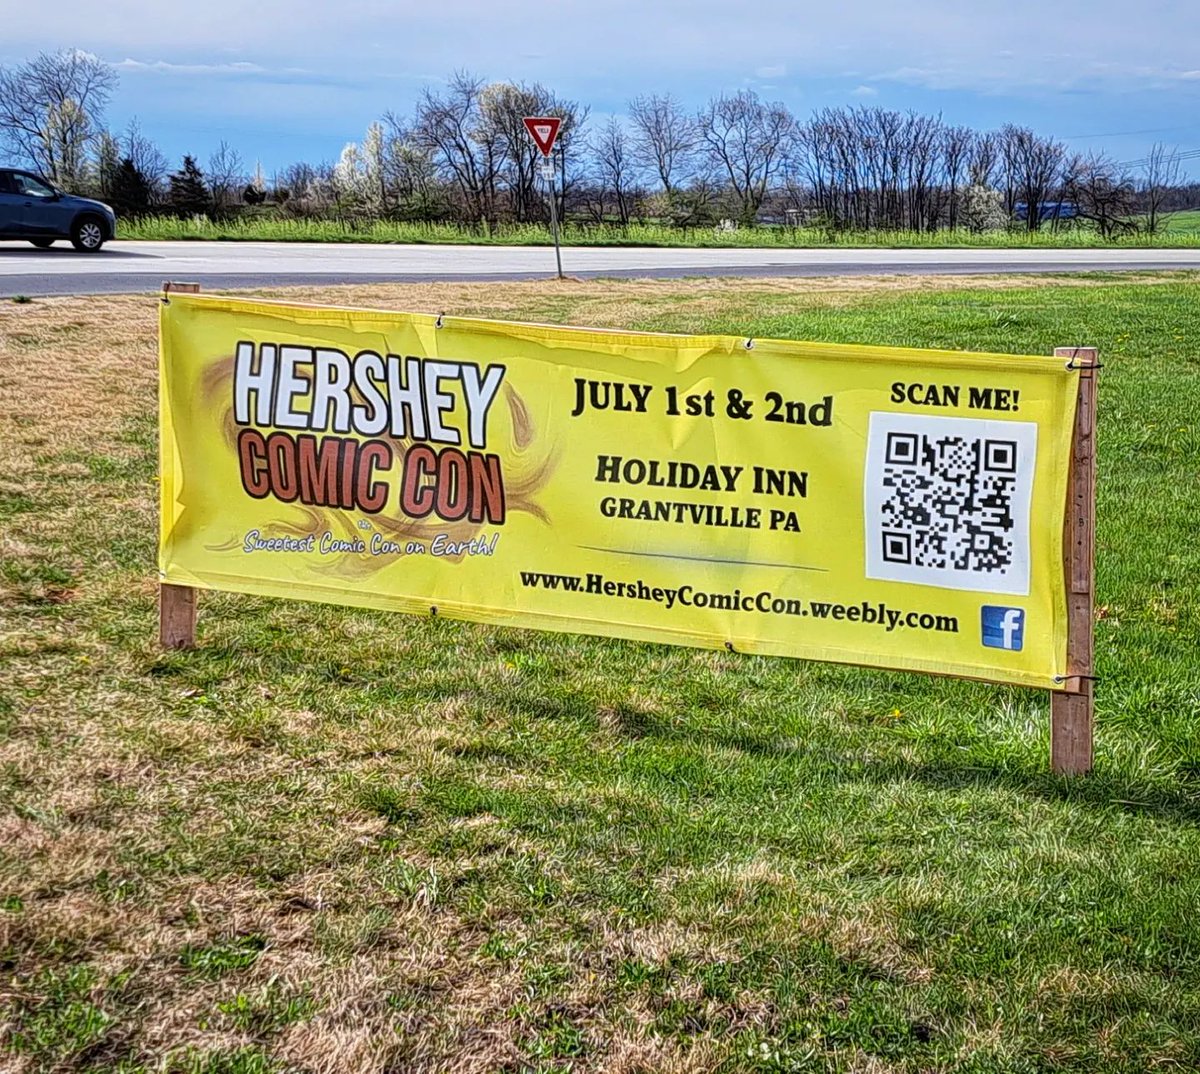 It's starting to feel real now!  We're getting closer to the actual date.  Just 3 months to go!

#hersheycomiccon #comiccon #comic #comiclovers #comicart #cosplay #fandom #marvel #dc #roythomas #tonyatlas #501stlegion